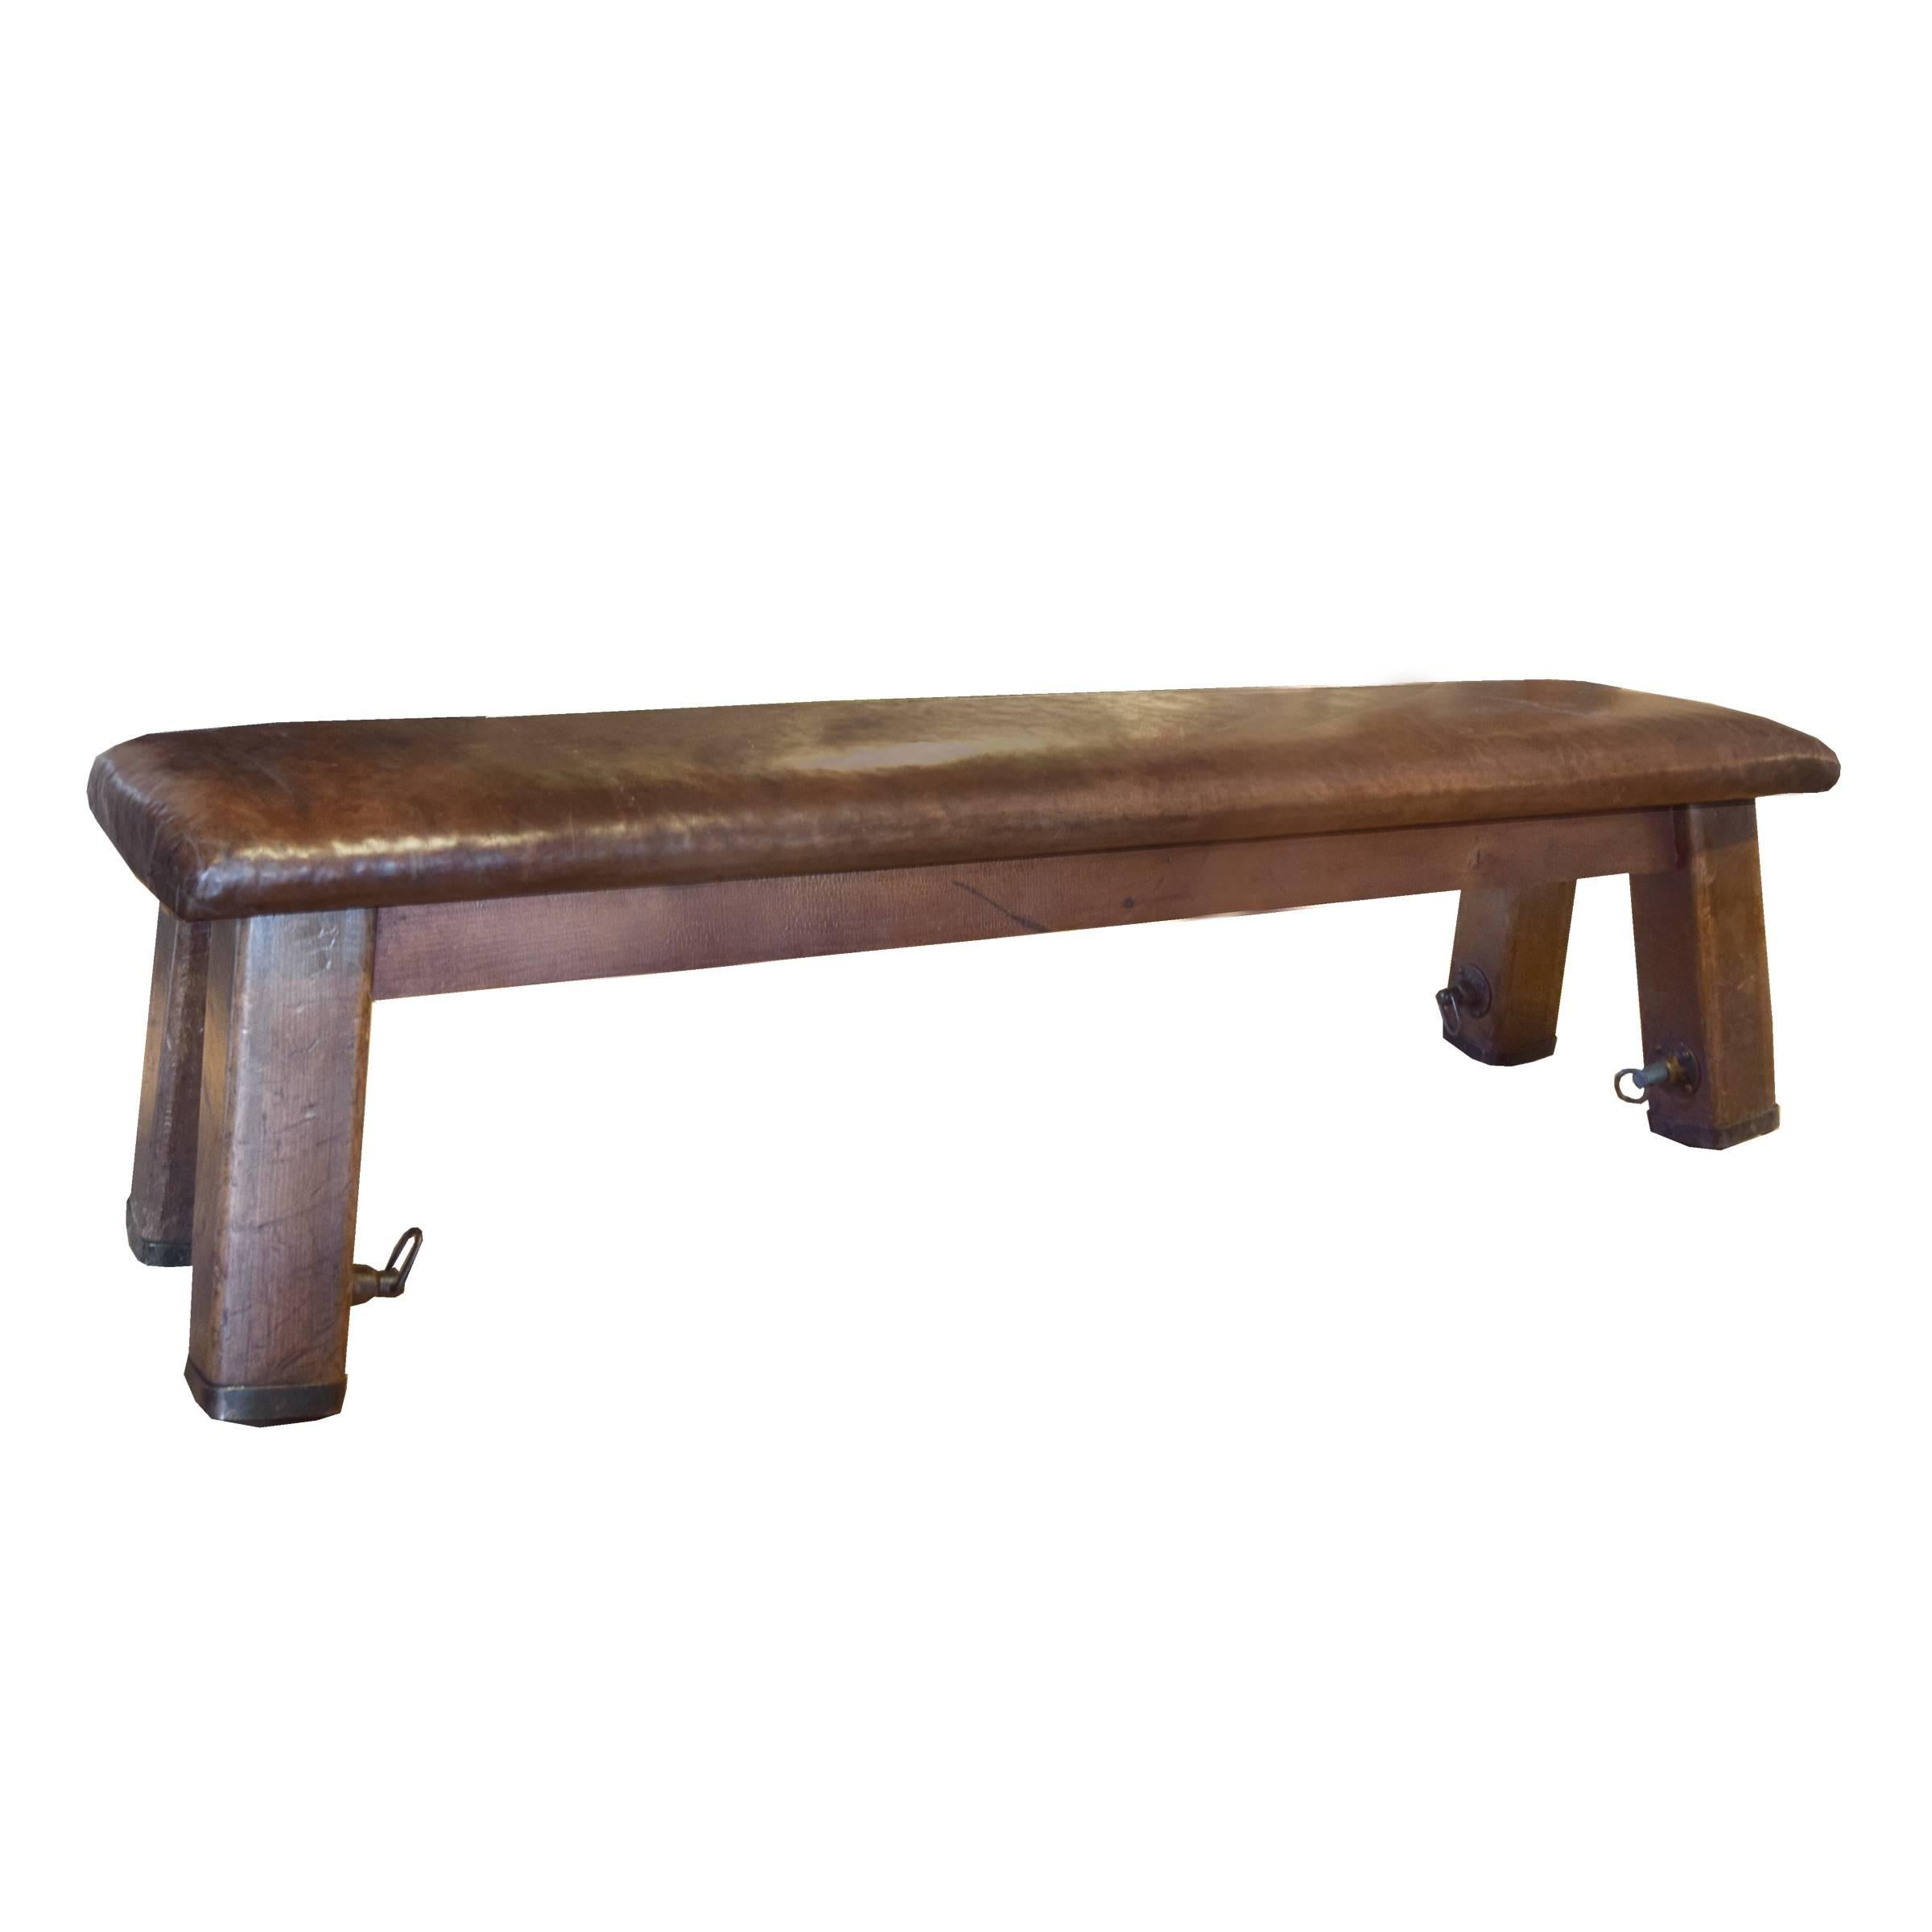 A Czech Republic wood vaulting bench with a leather top and slightly tapered square legs, circa 1930.